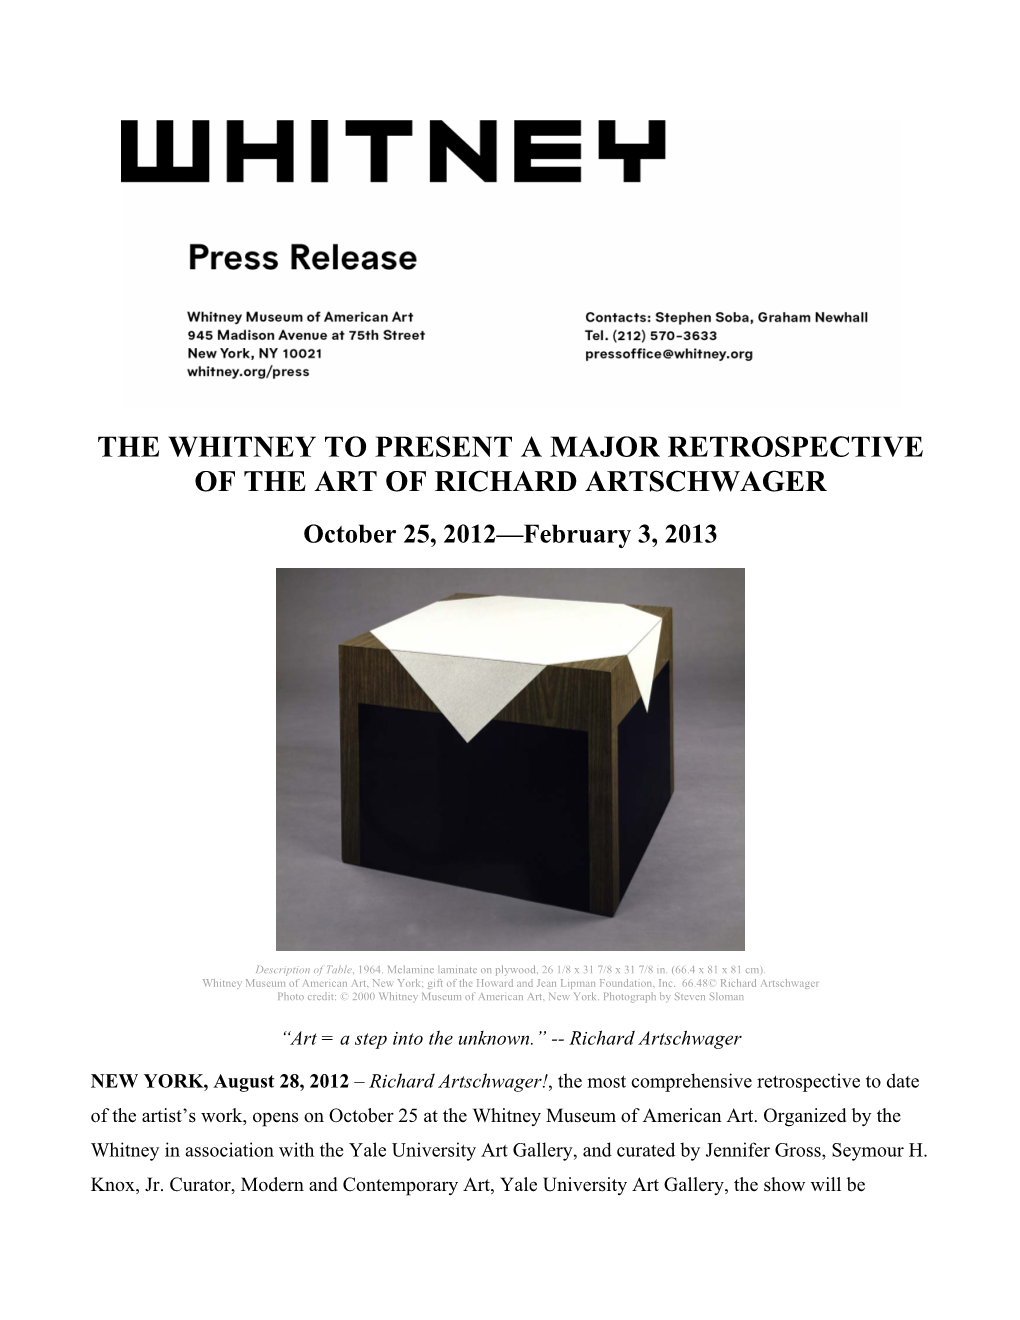 THE WHITNEY to PRESENT a MAJOR RETROSPECTIVE of the ART of RICHARD ARTSCHWAGER October 25, 2012—February 3, 2013